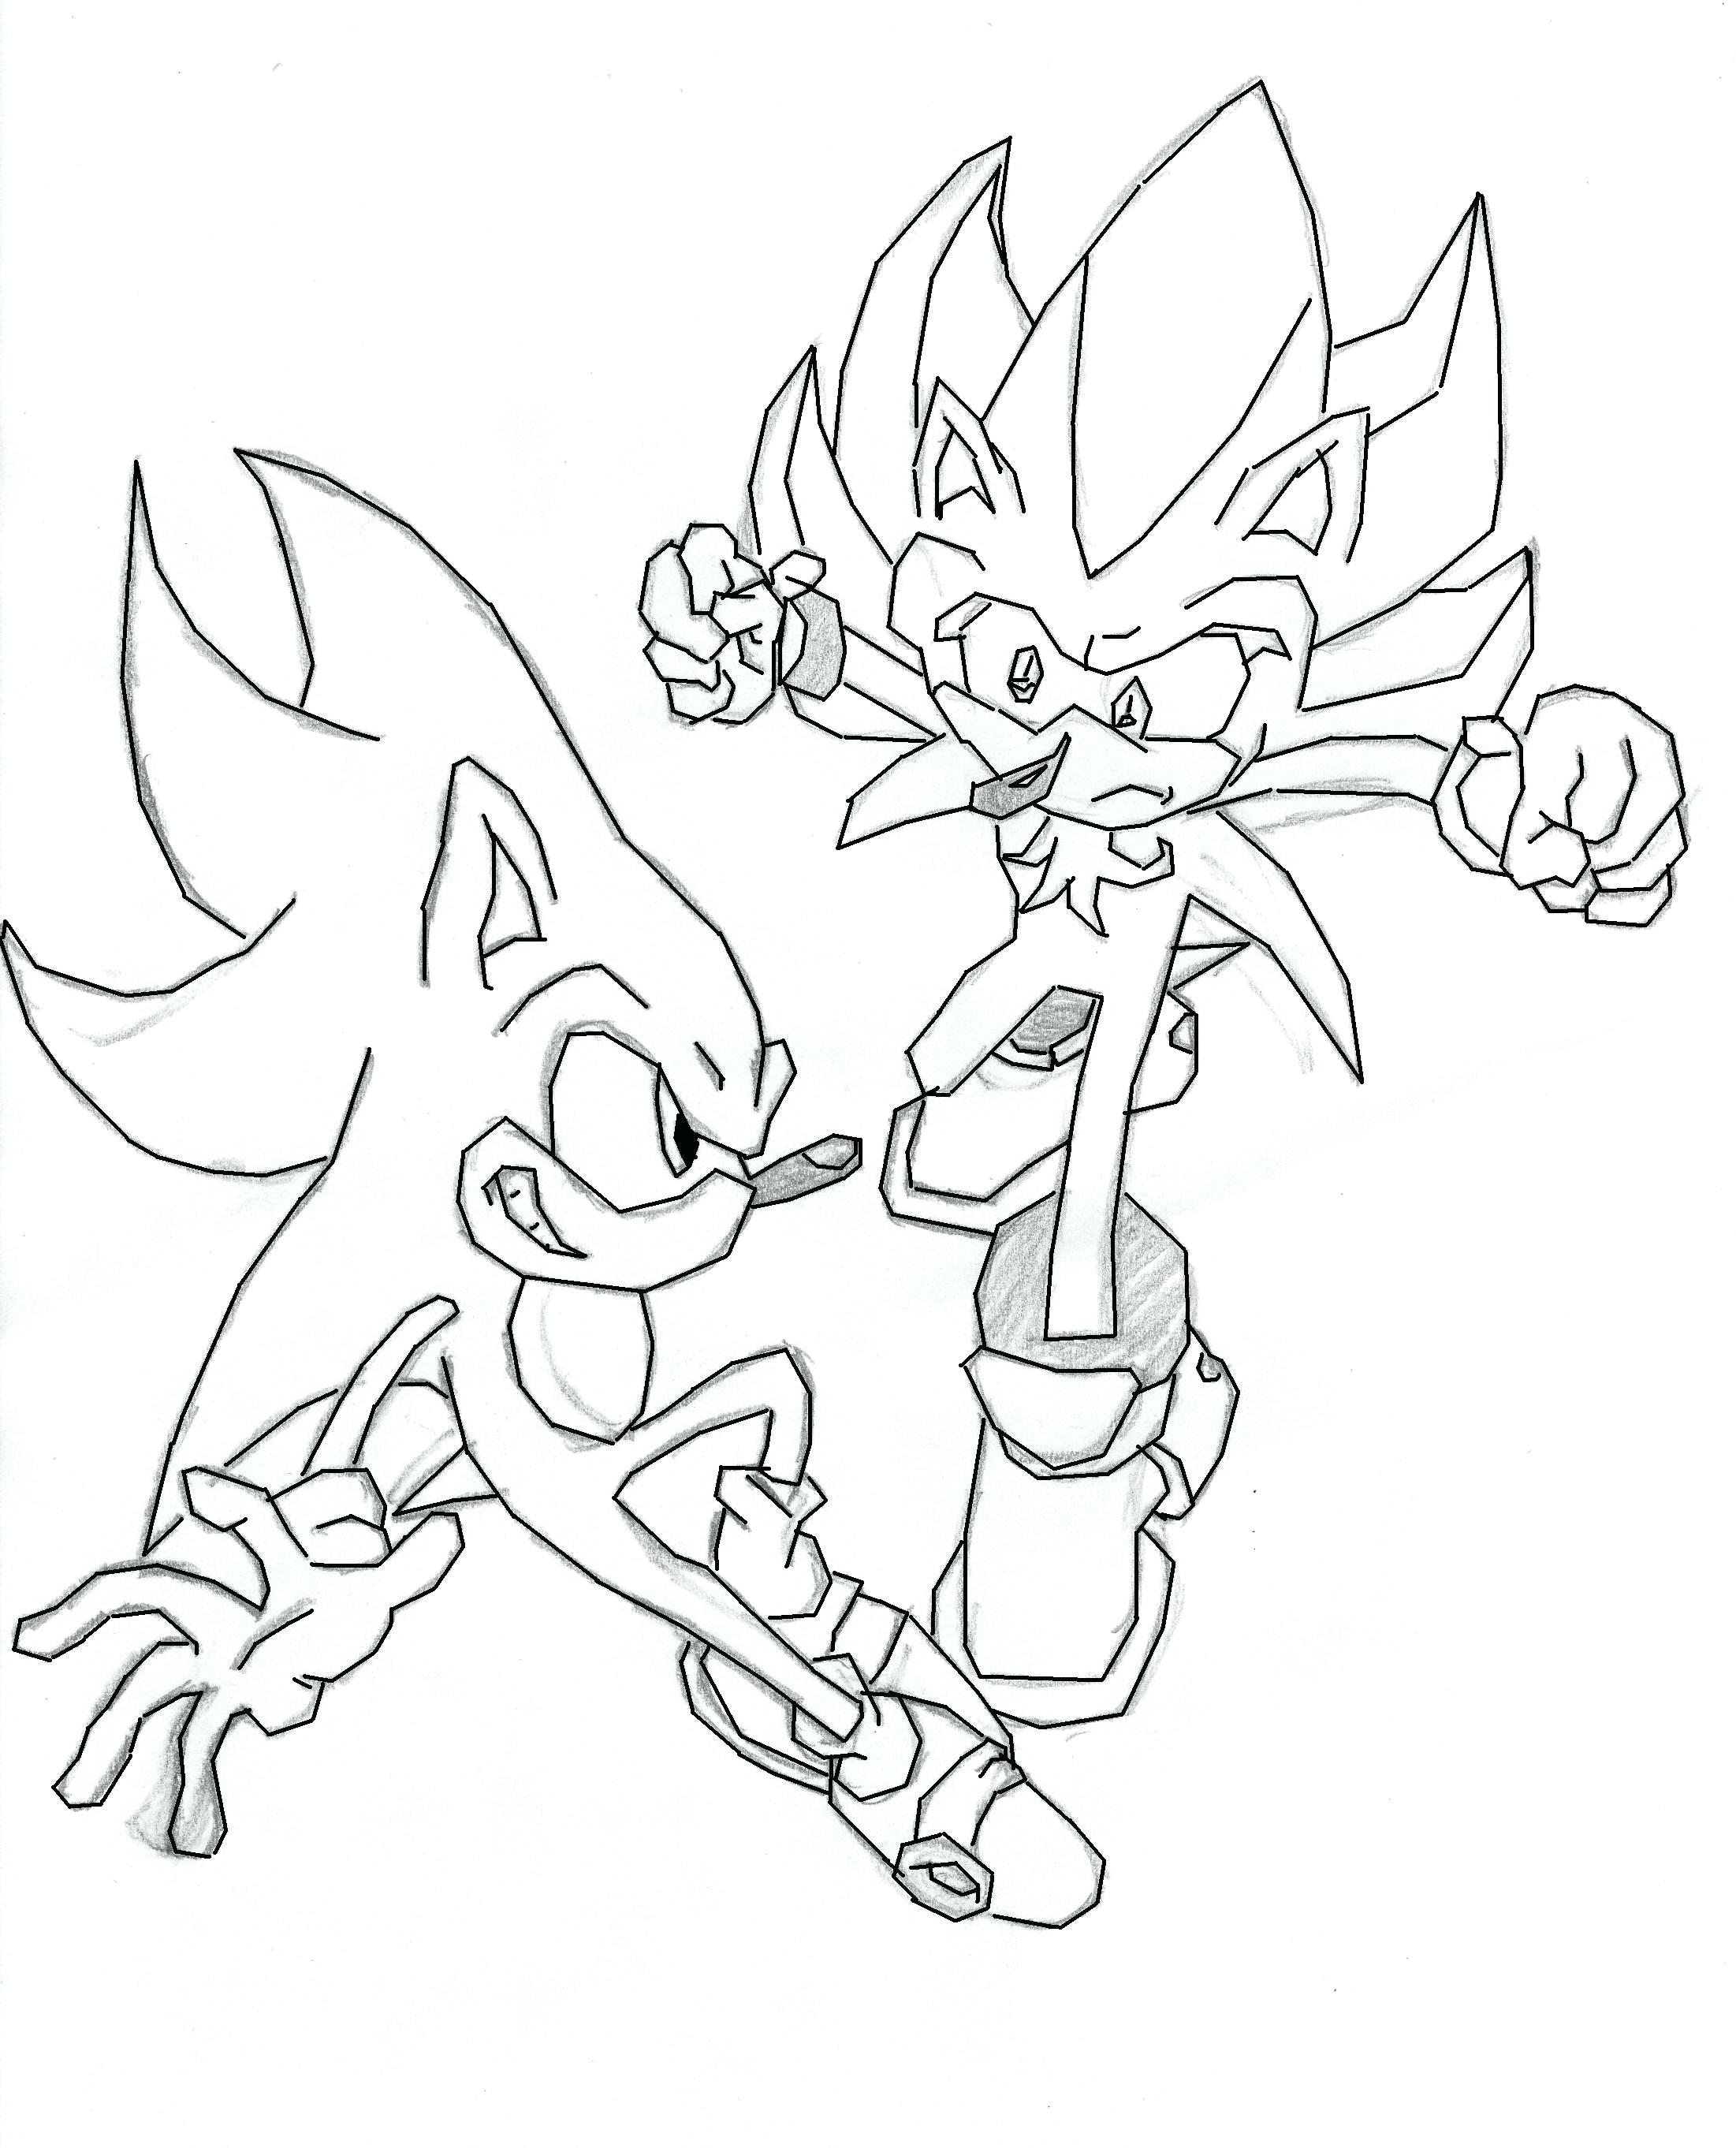 Sonic And Friends Coloring Pages at GetColorings.com | Free printable ...